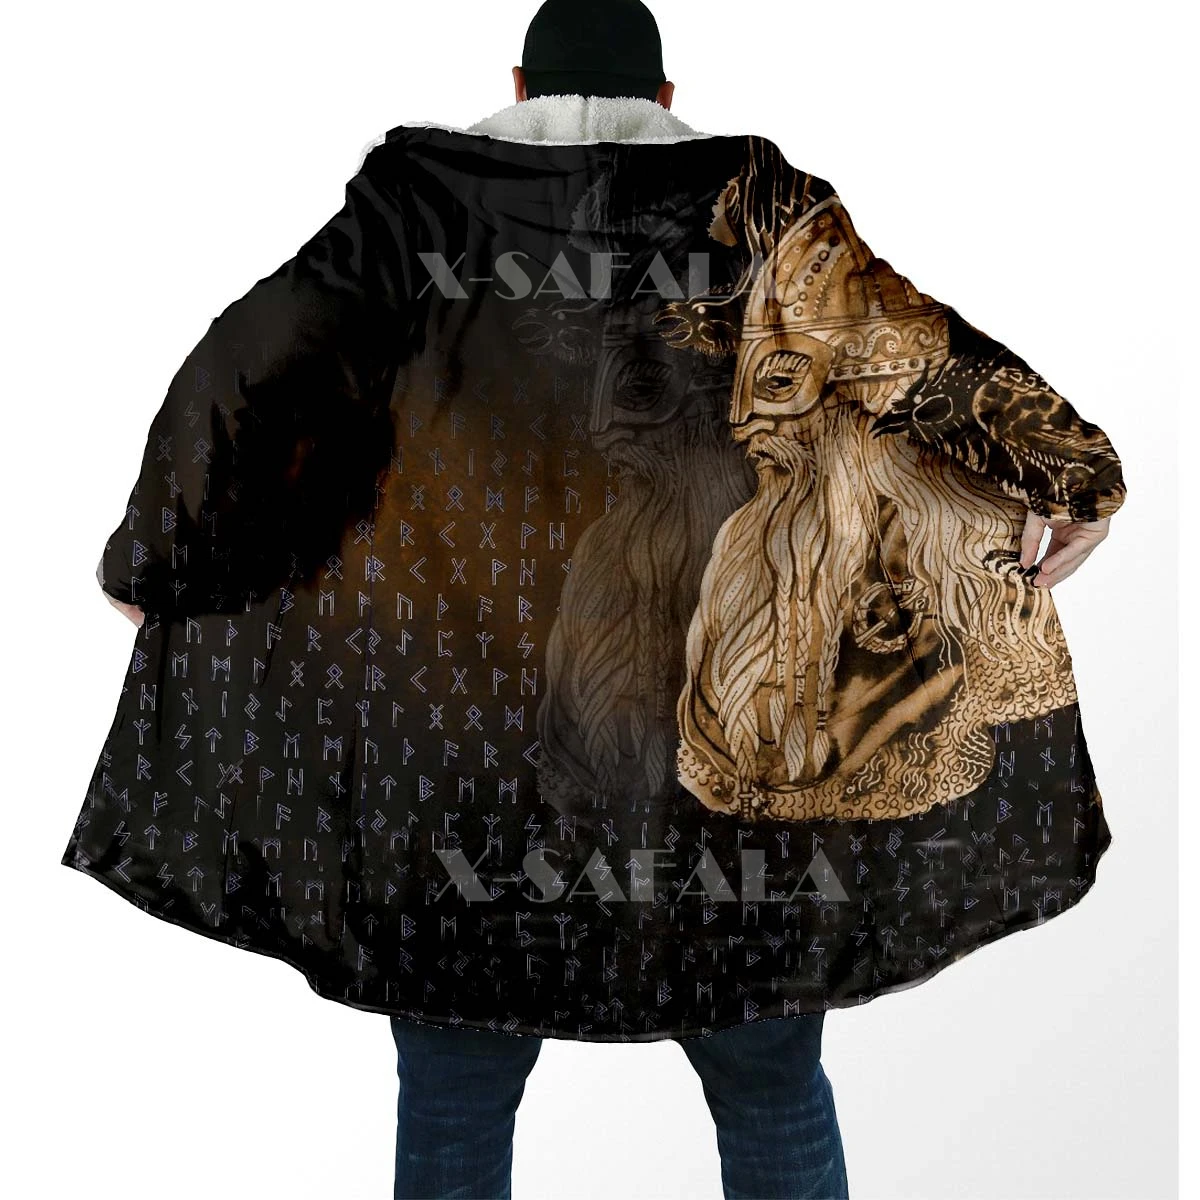 

Viking Odin Raven Gold All Over 3D Printed Hoodie Long Duffle Topcoat Hooded Blanket Cloak Thick Jacket Cotton Pullovers